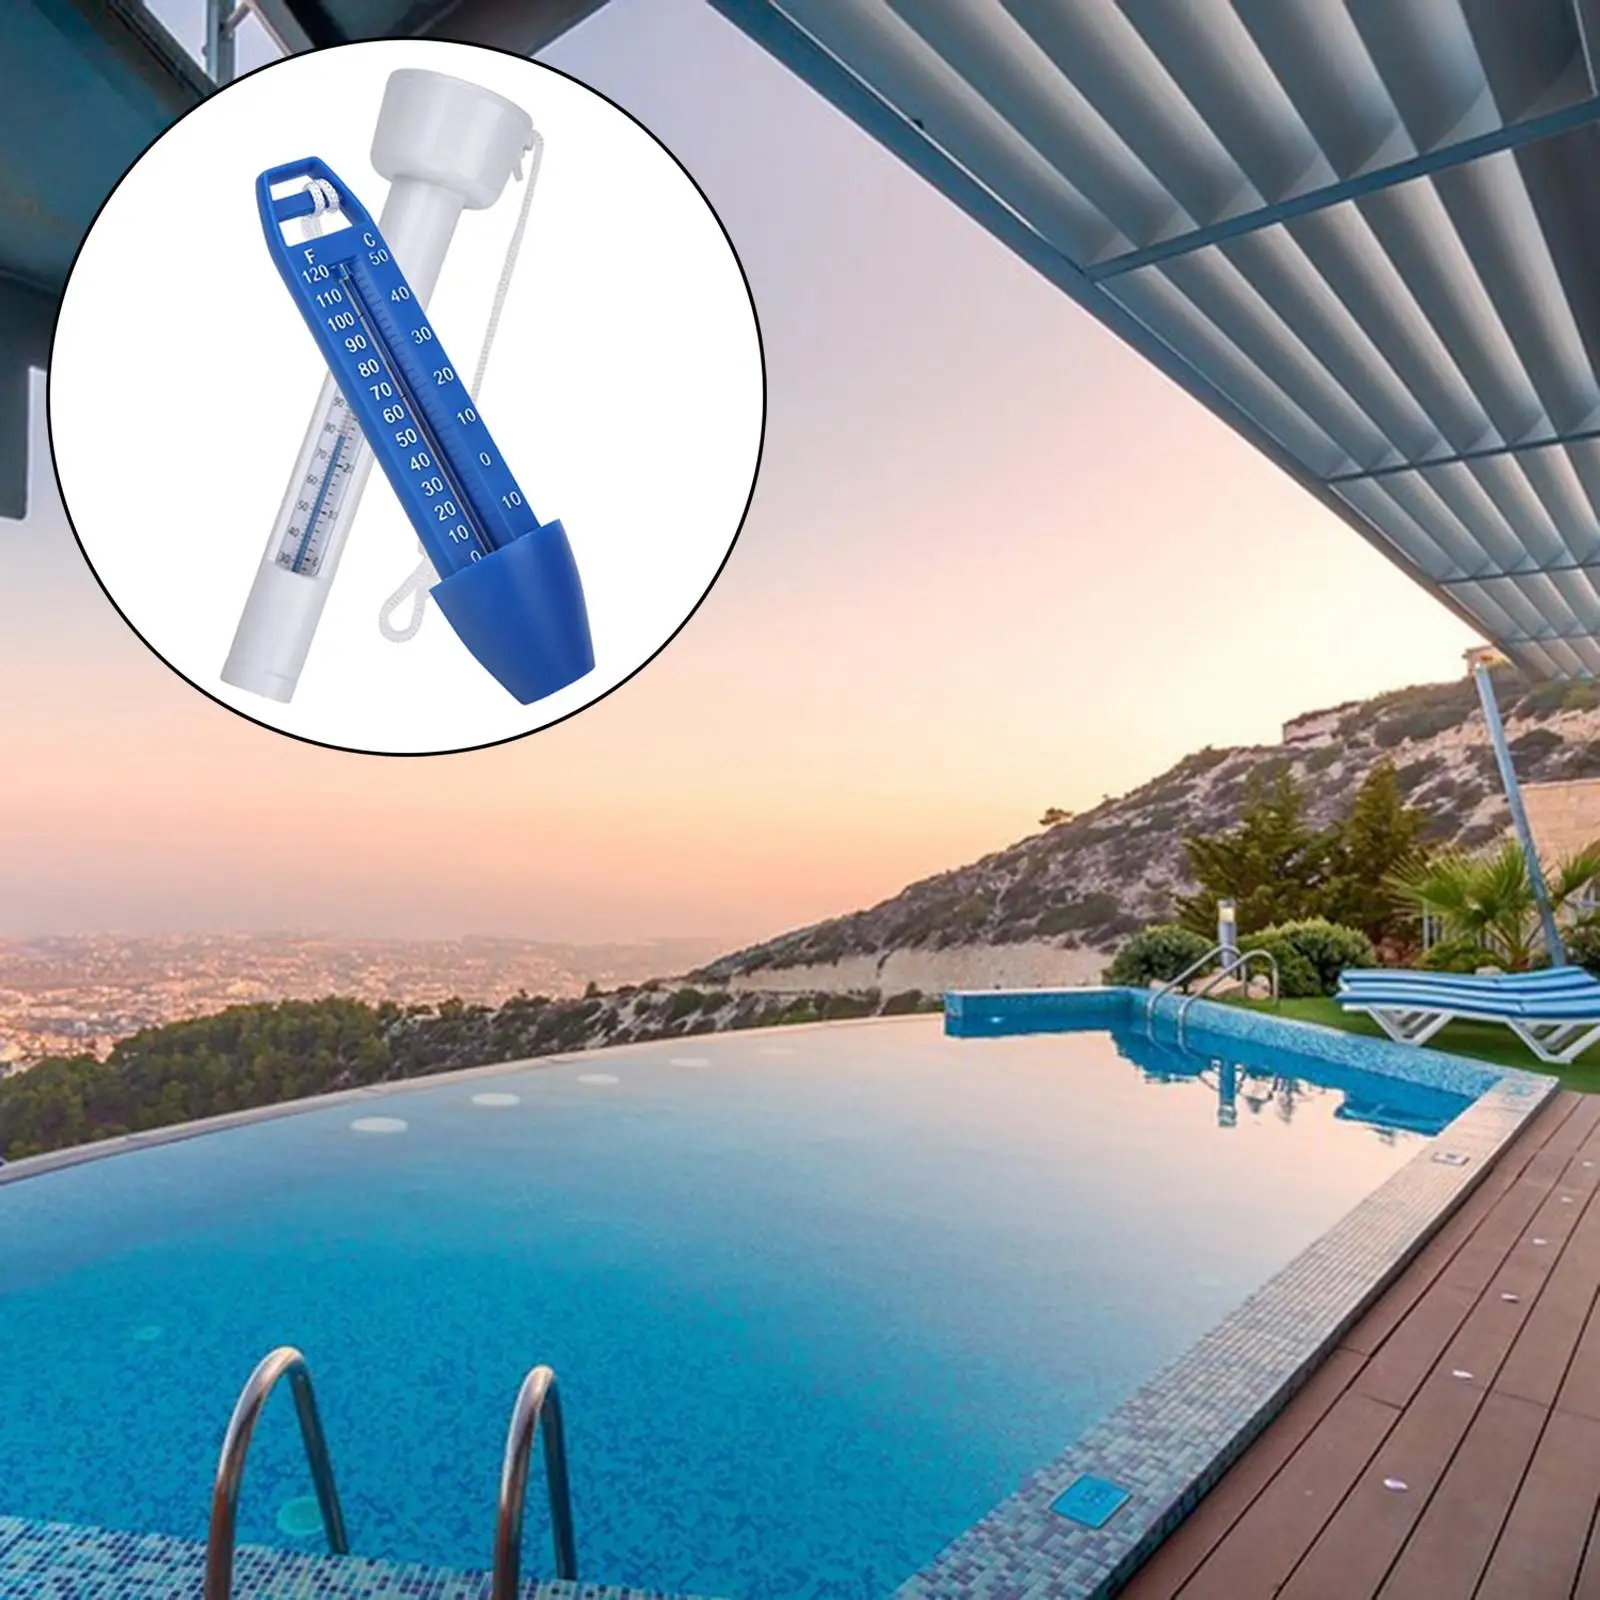 Pool  Floating , Easy to Read Water Temperature Measuring Tool for Swimming Pool, Pond, Spa, Hot Tub,  & Celsius